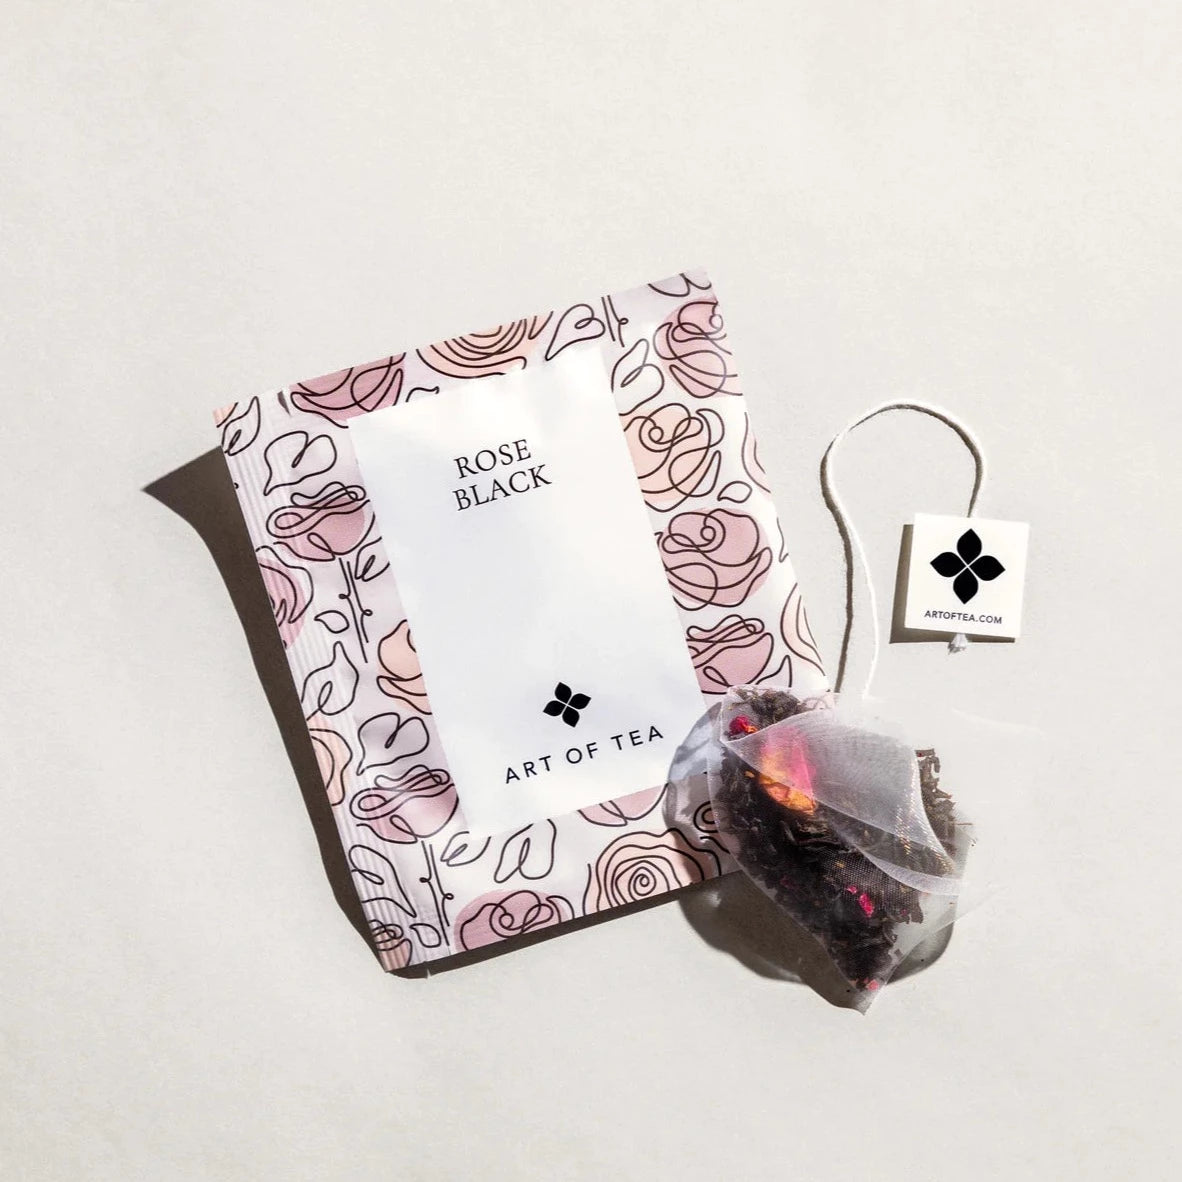 Rose Black tea sachet. Sachet has doodles of roses all over it and sachet is a very pale pink. Each doodled rose has a various shade of pink. Tea bag is outside the sachet